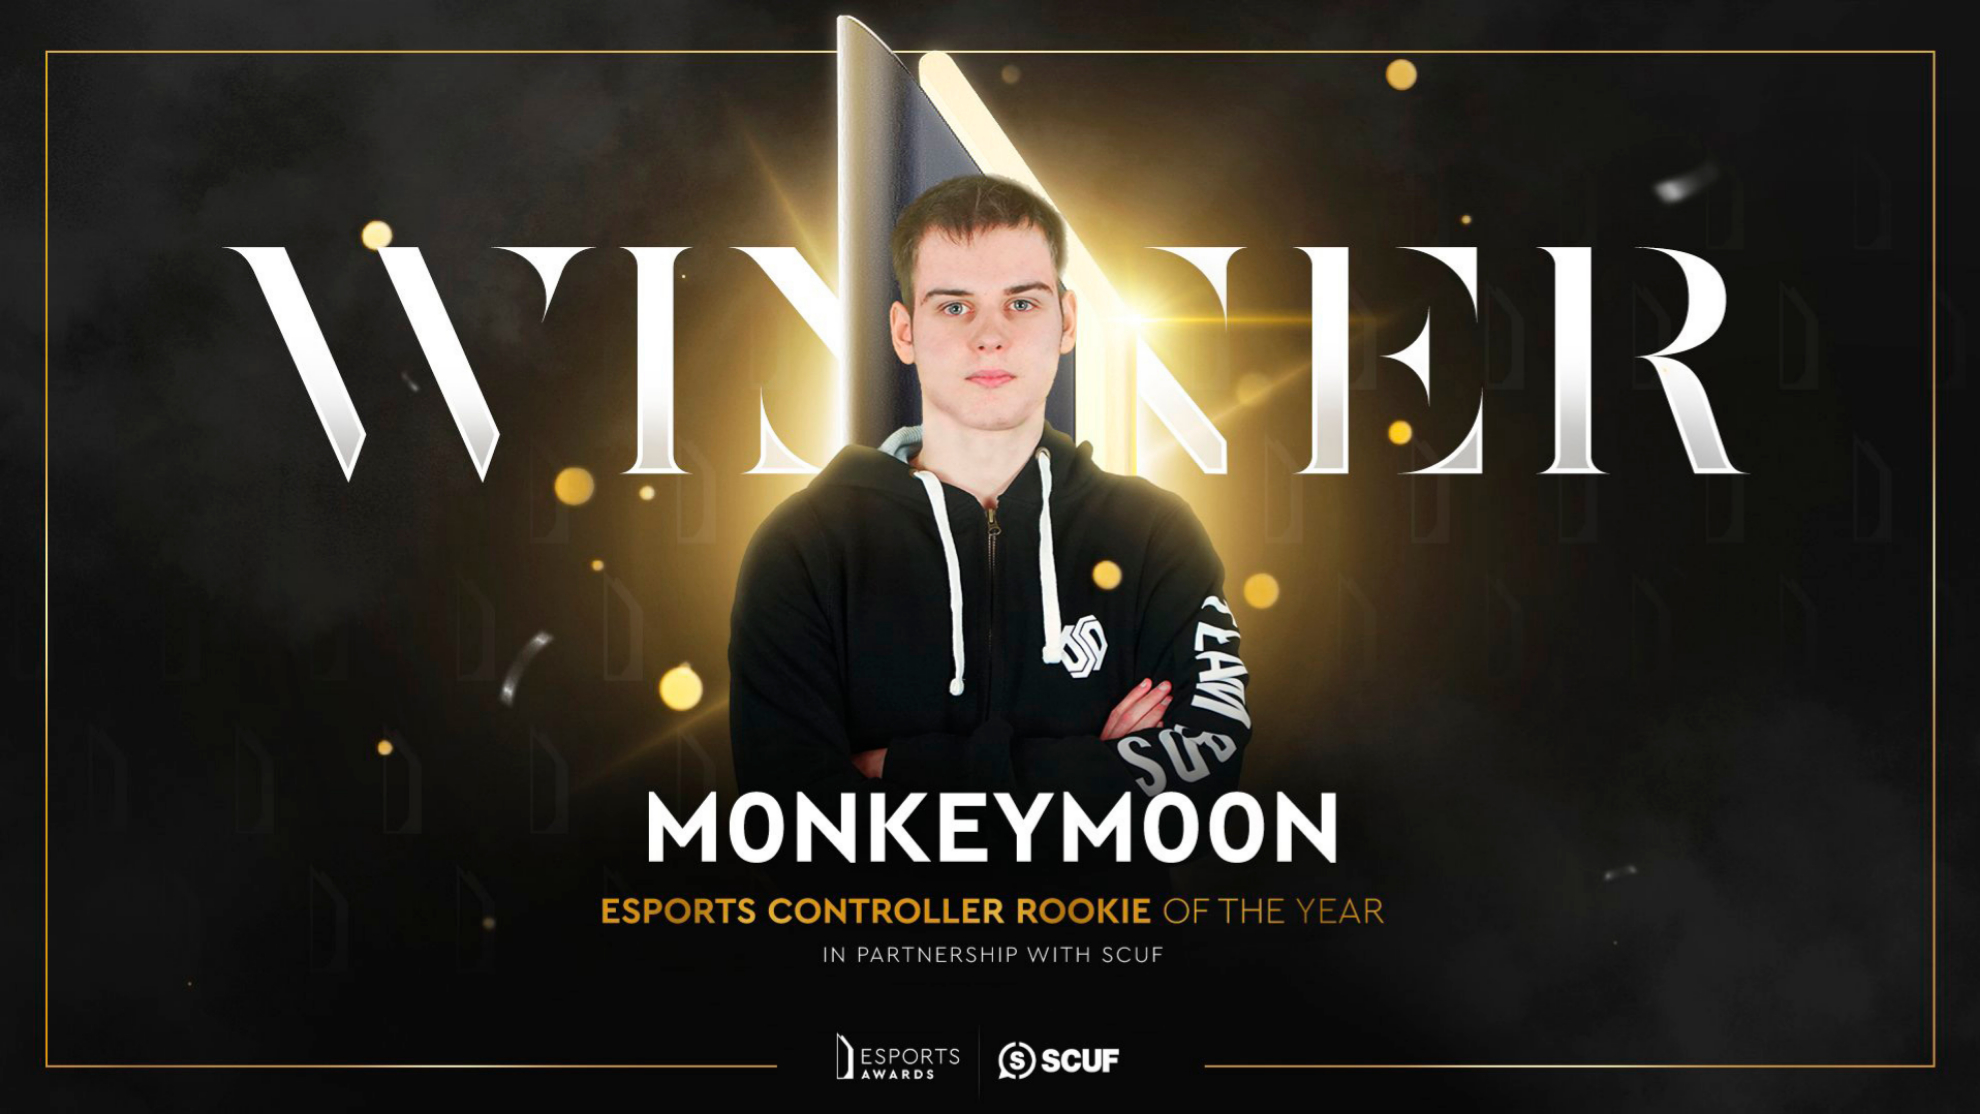 Esports Controller Rookie of the Year